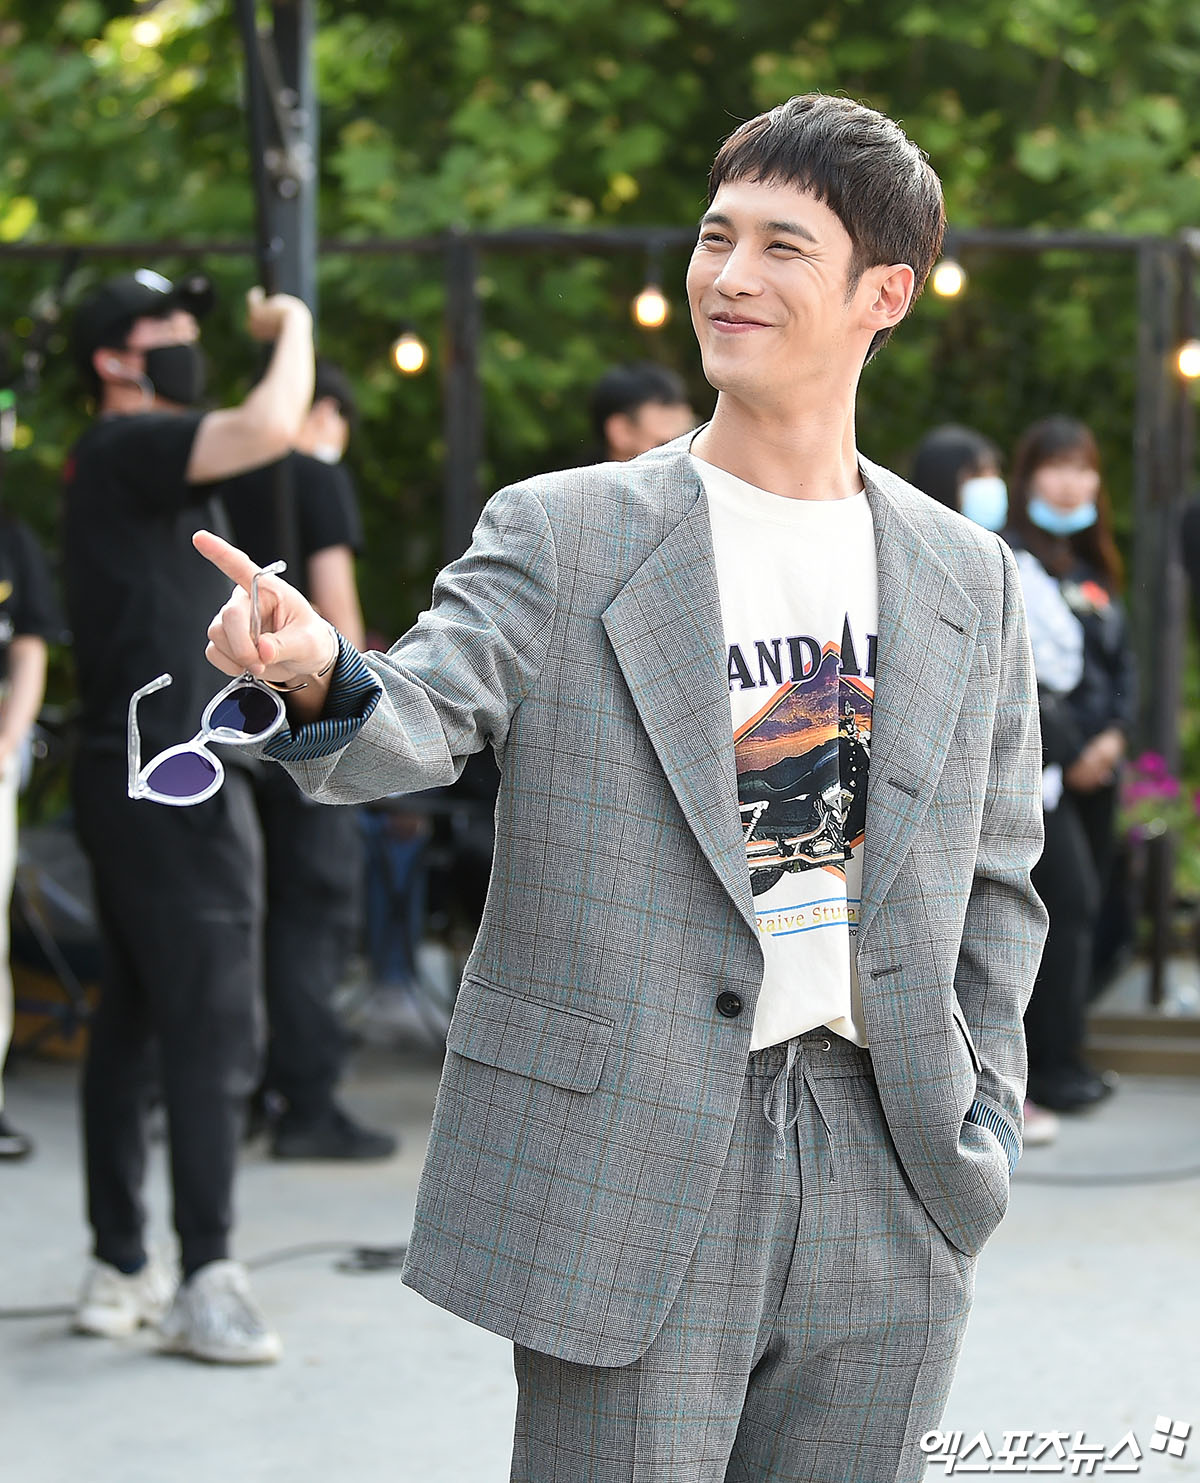 Actor Park Ki-woong, who attended the filming of MBCs tree drama Dae Intern (production studio HIM) held at a Cafe in Seongsu-dong 2 in Seoul on the afternoon of the 28th, is working on rehearsal.